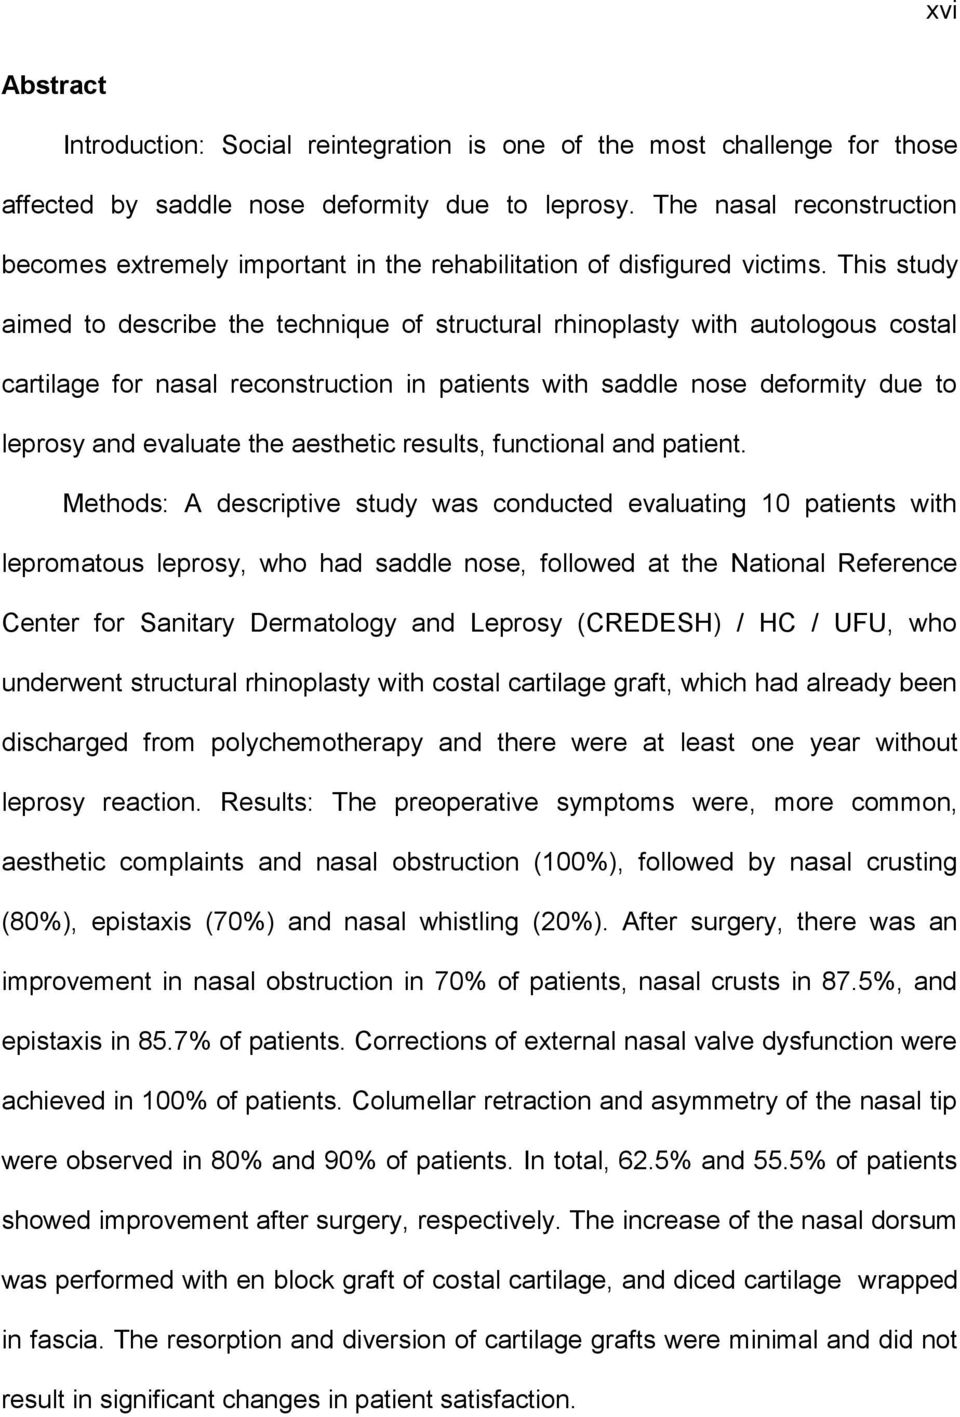 This study aimed to describe the technique of structural rhinoplasty with autologous costal cartilage for nasal reconstruction in patients with saddle nose deformity due to leprosy and evaluate the